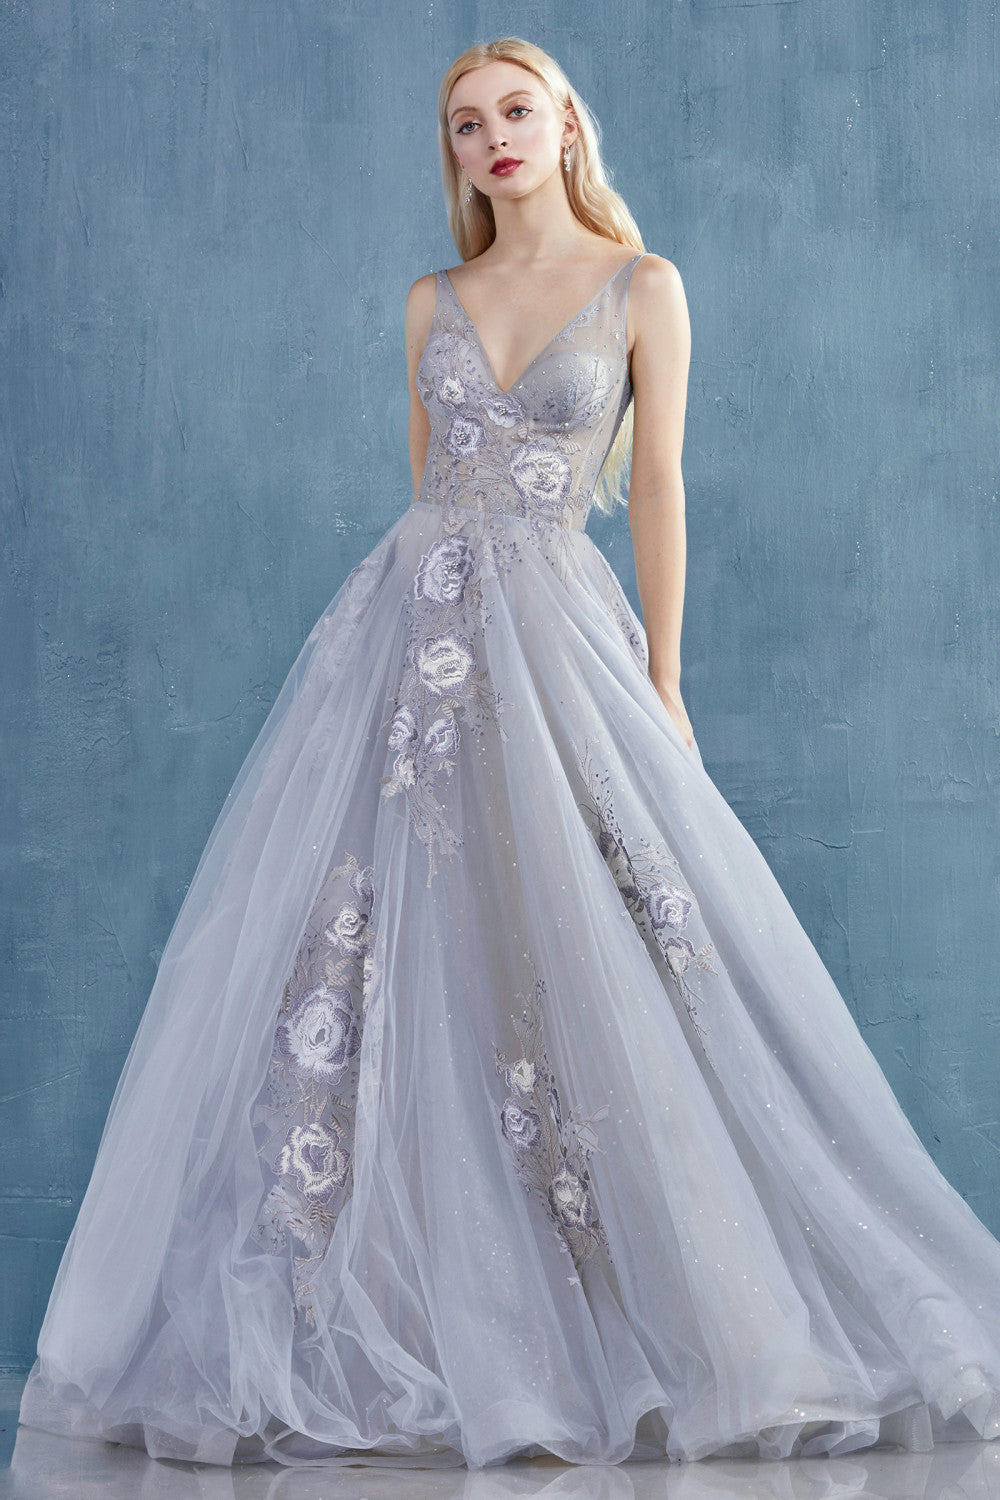 Paris Blue Lace And Embroidered Ball Gown